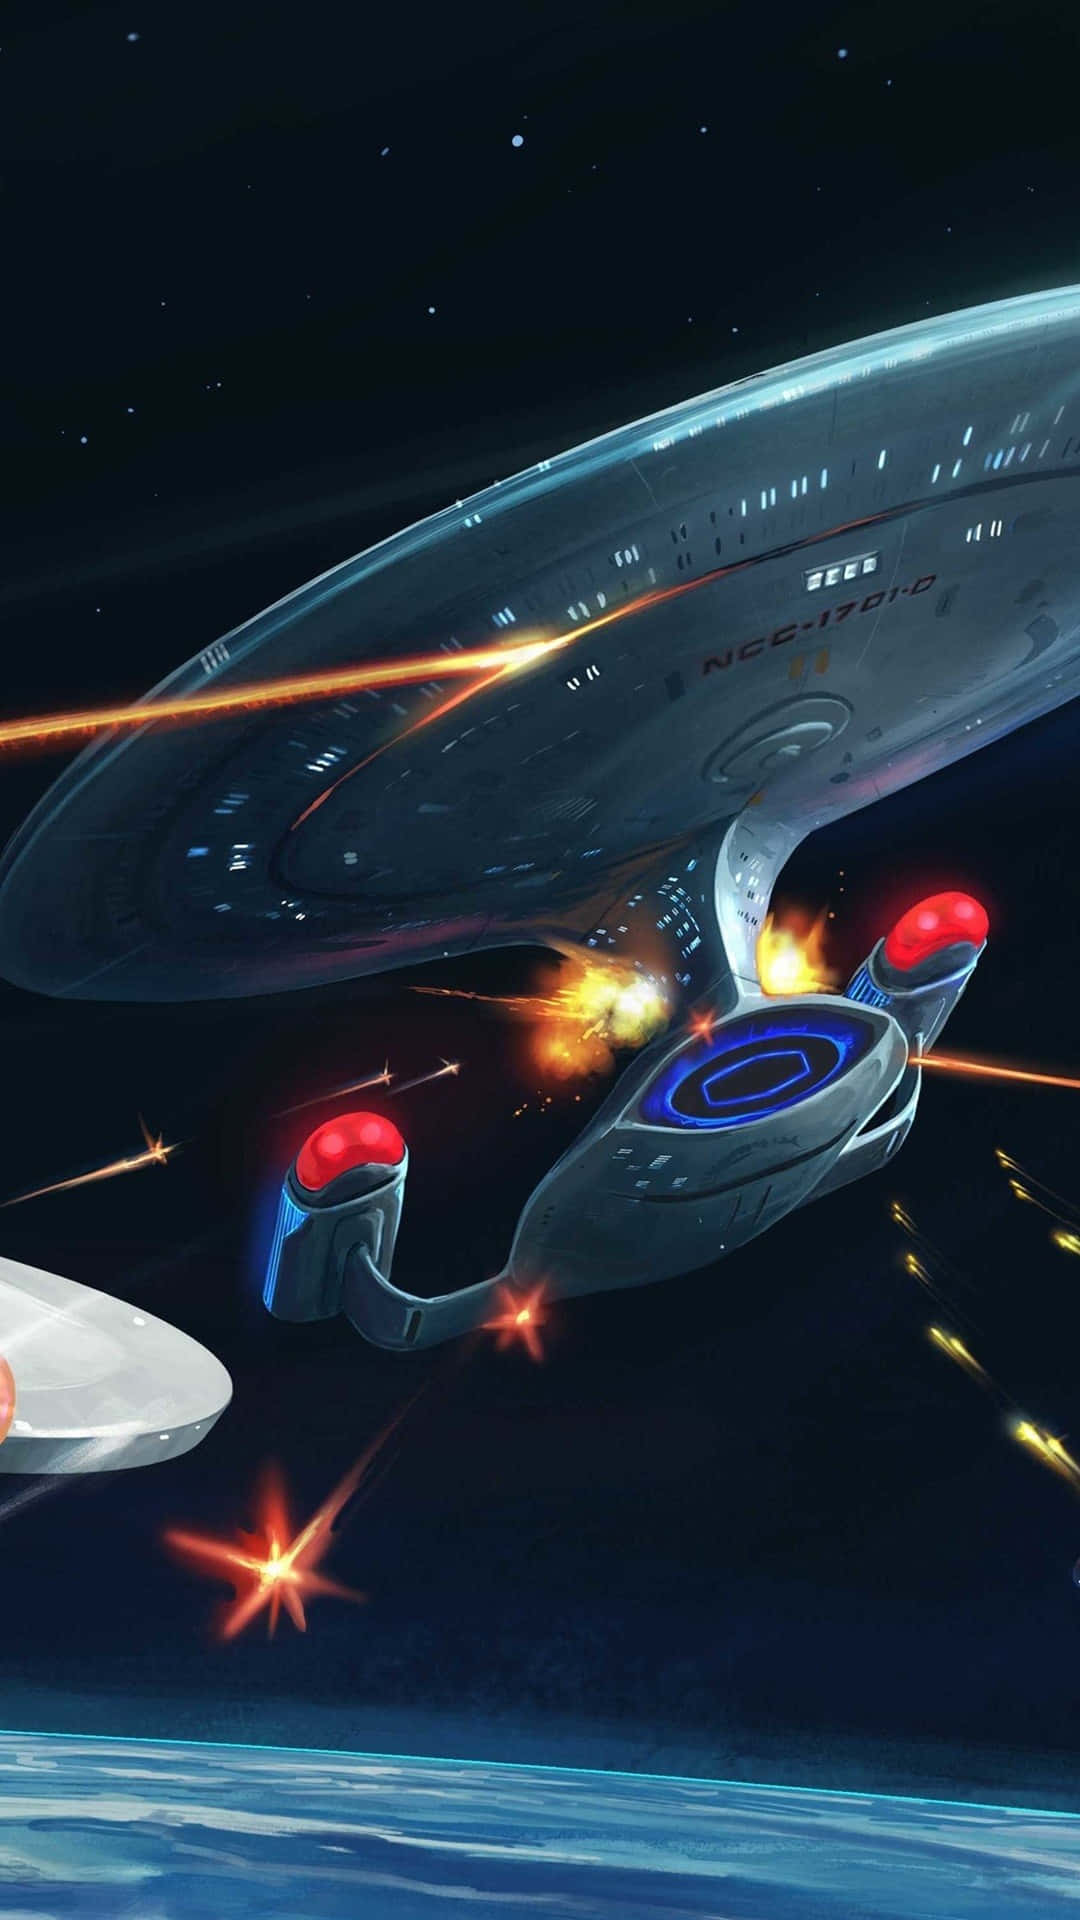 The U.s.s Enterprise Sets Sail On Its Mission To Explore The Final Frontier Wallpaper